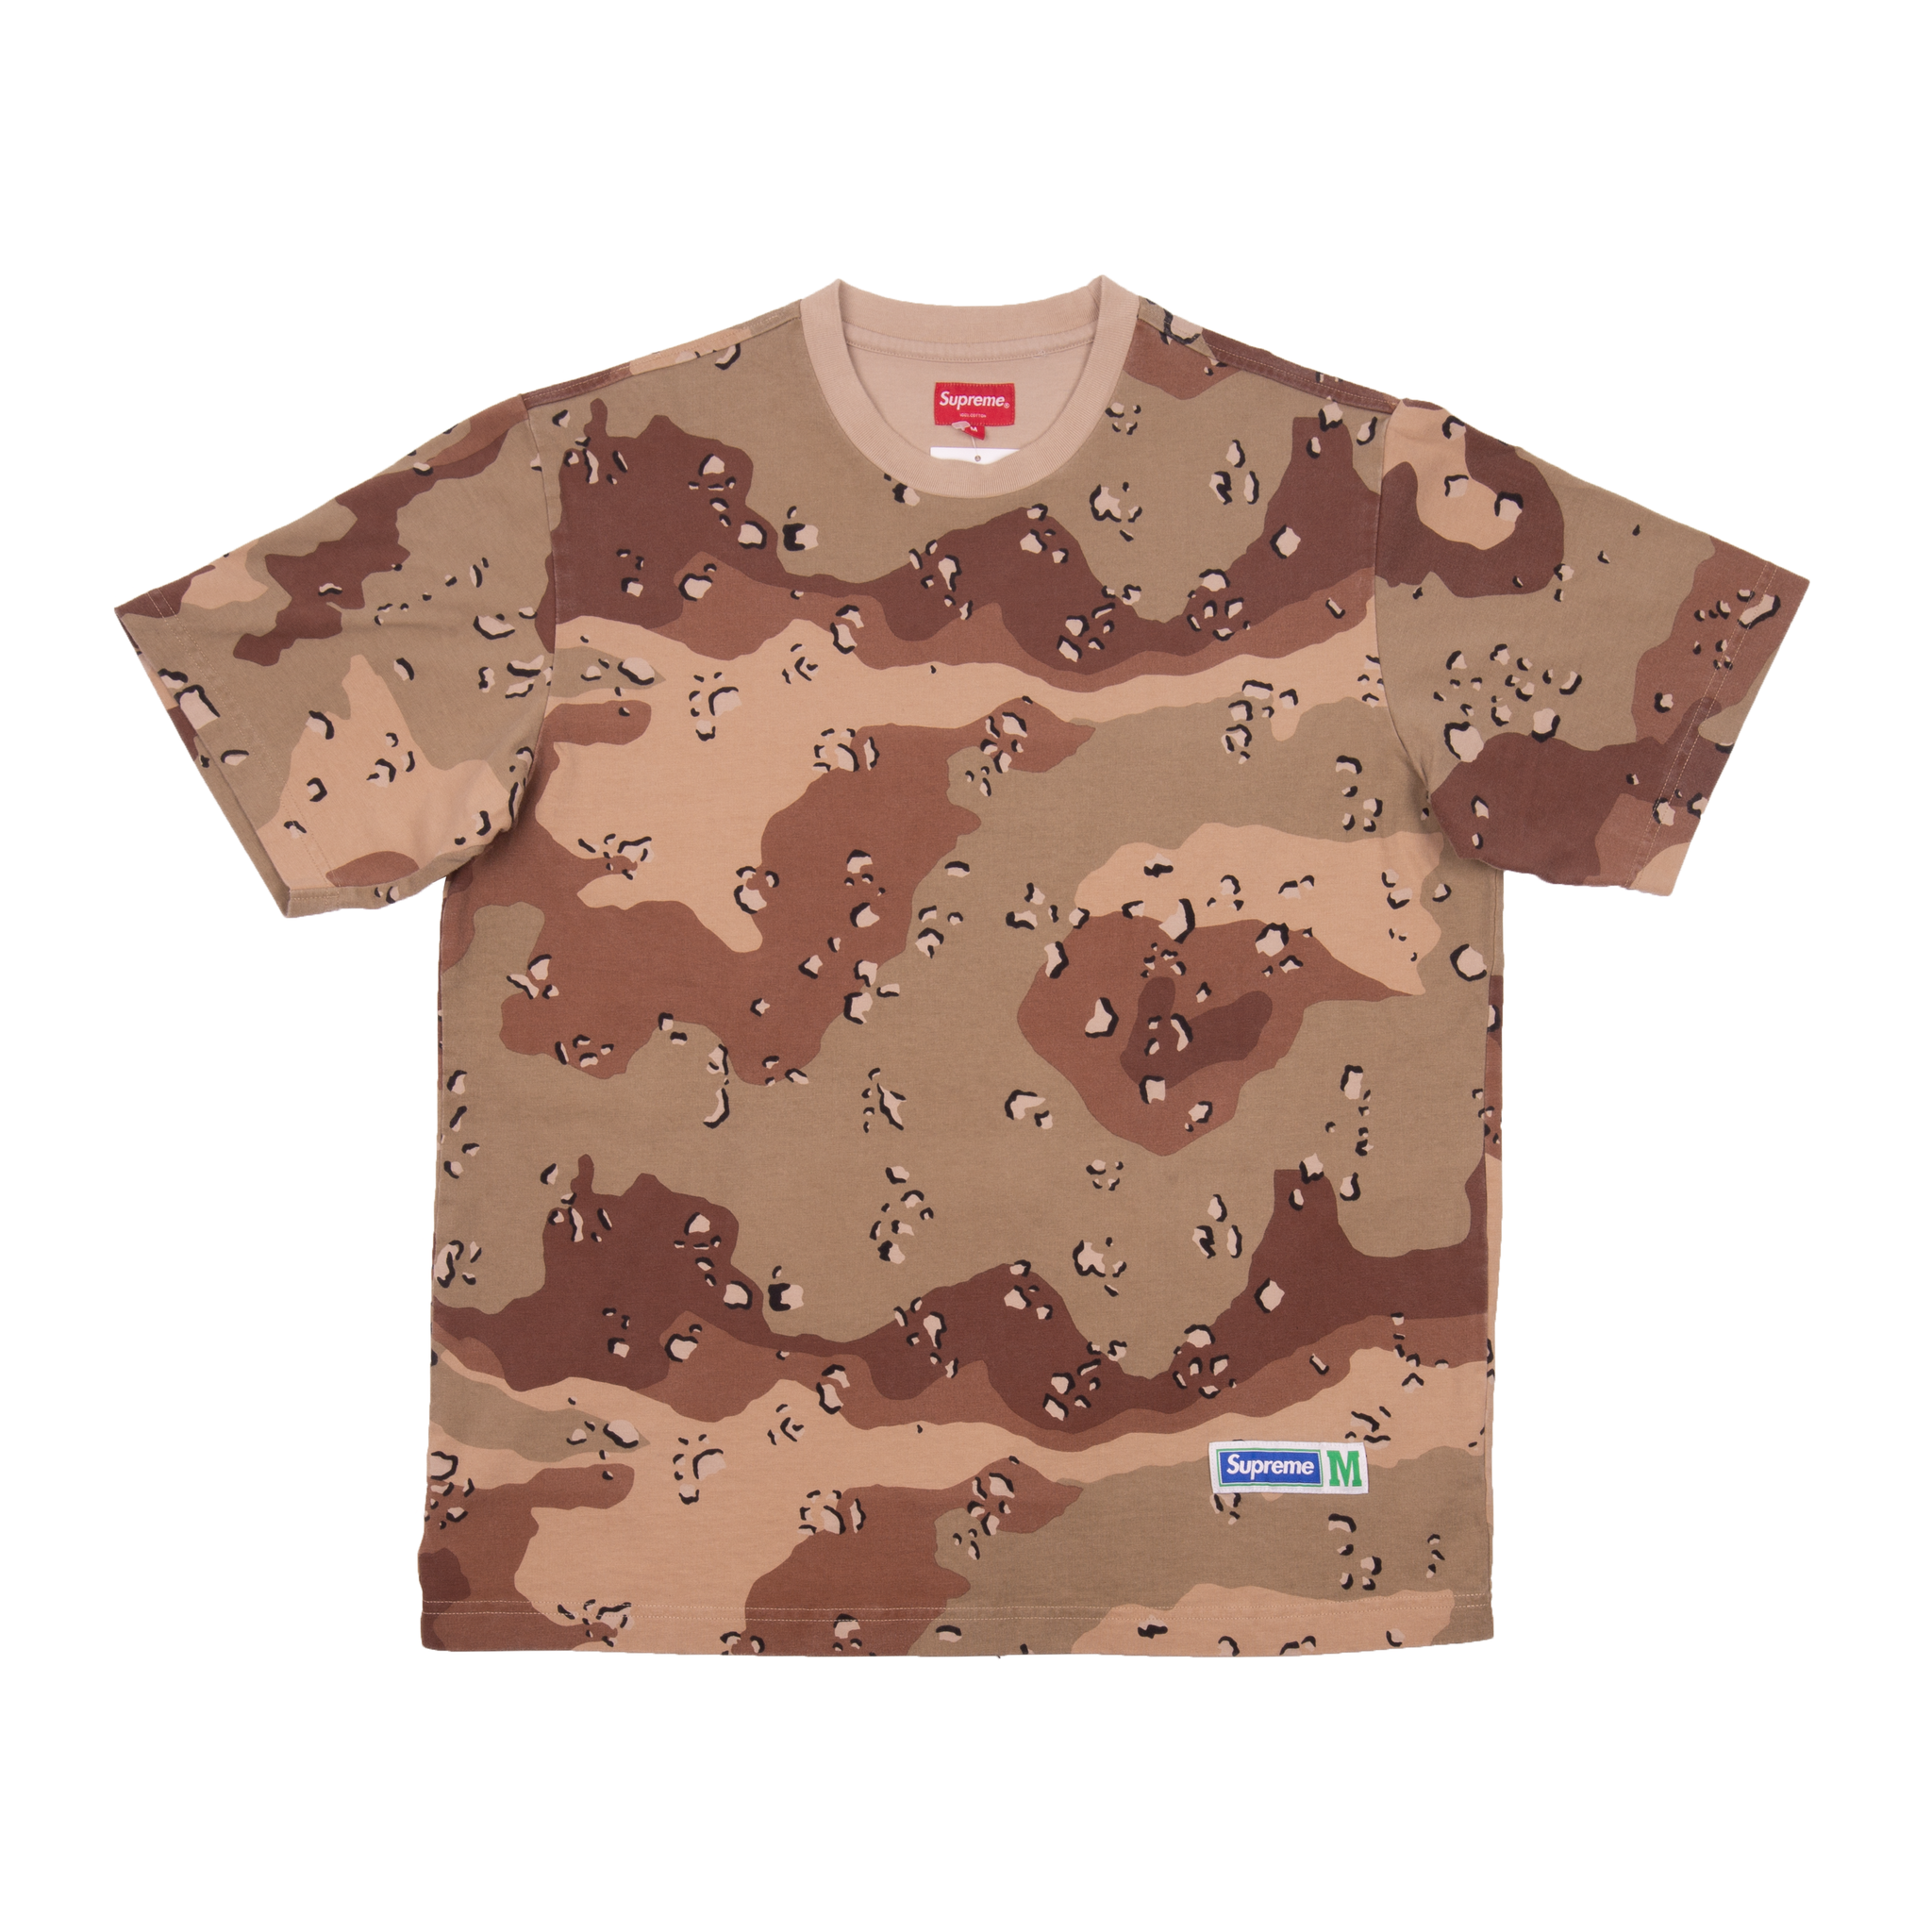 Supreme Chocolate Chip Camo Athletic Top